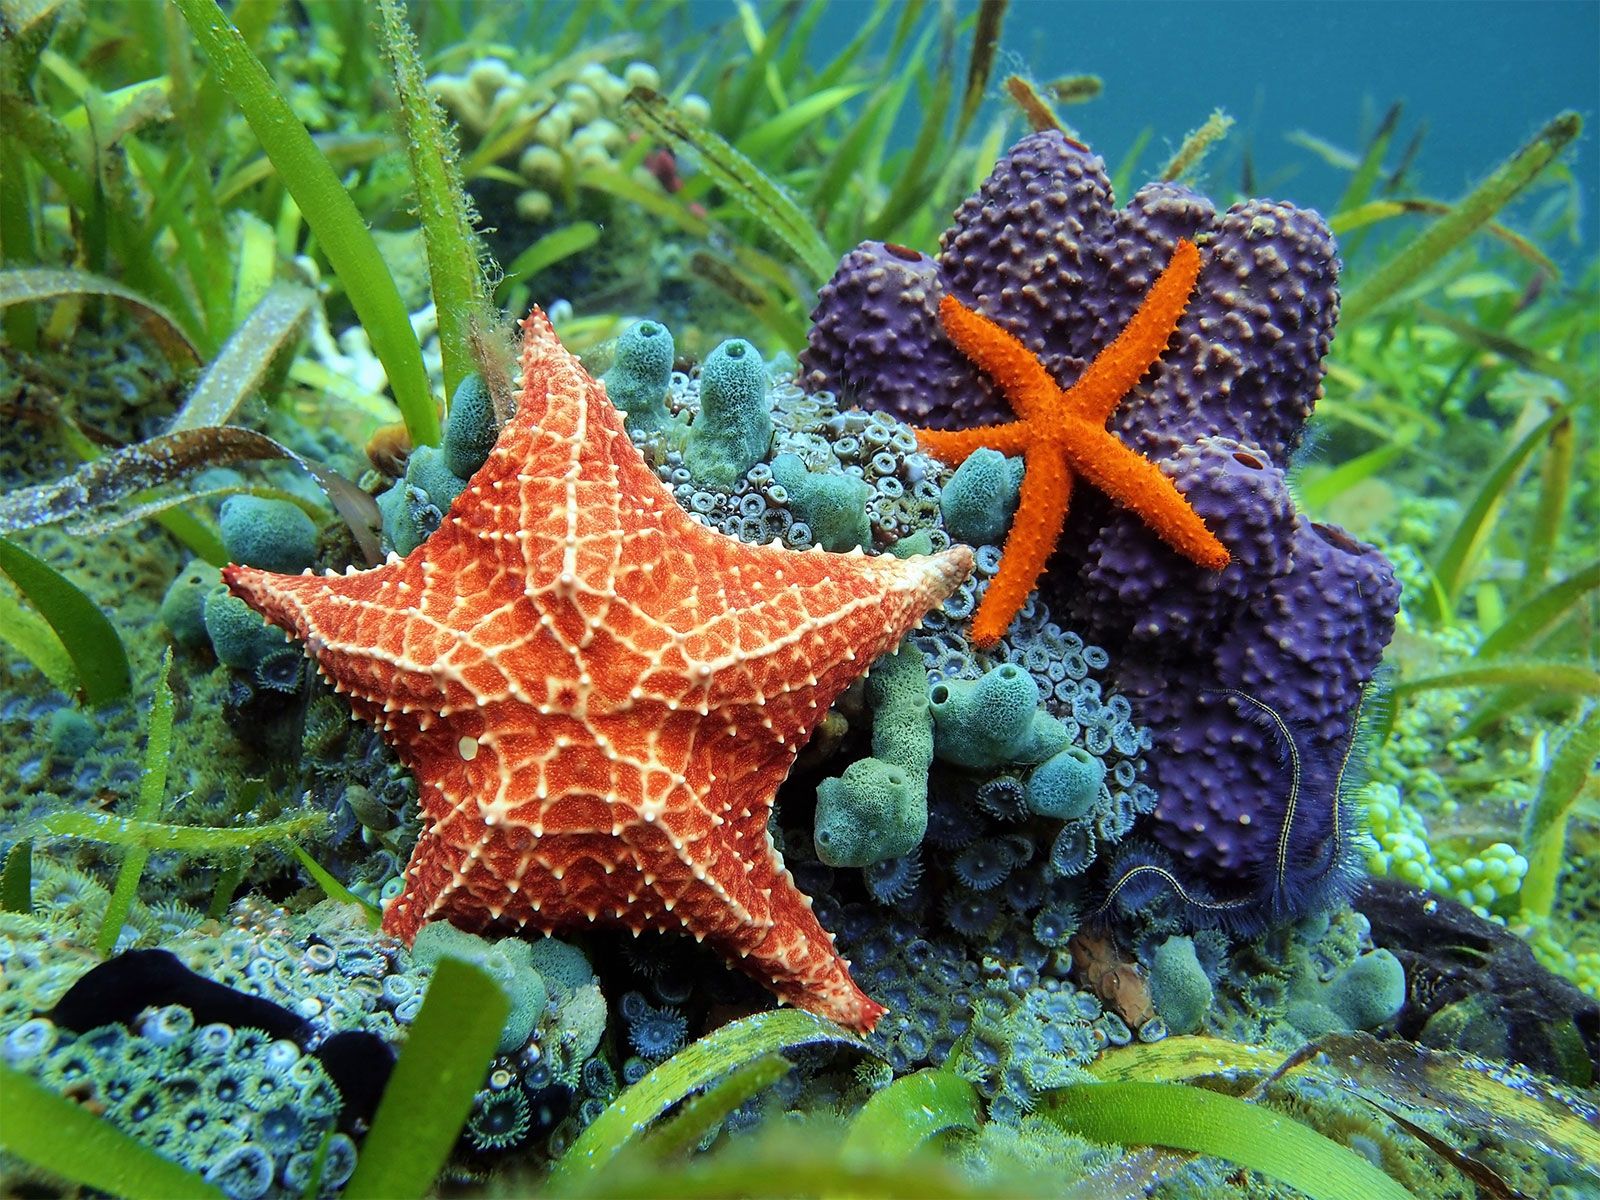 Starfish Bodies Aren’t Bodies at All, Study Finds